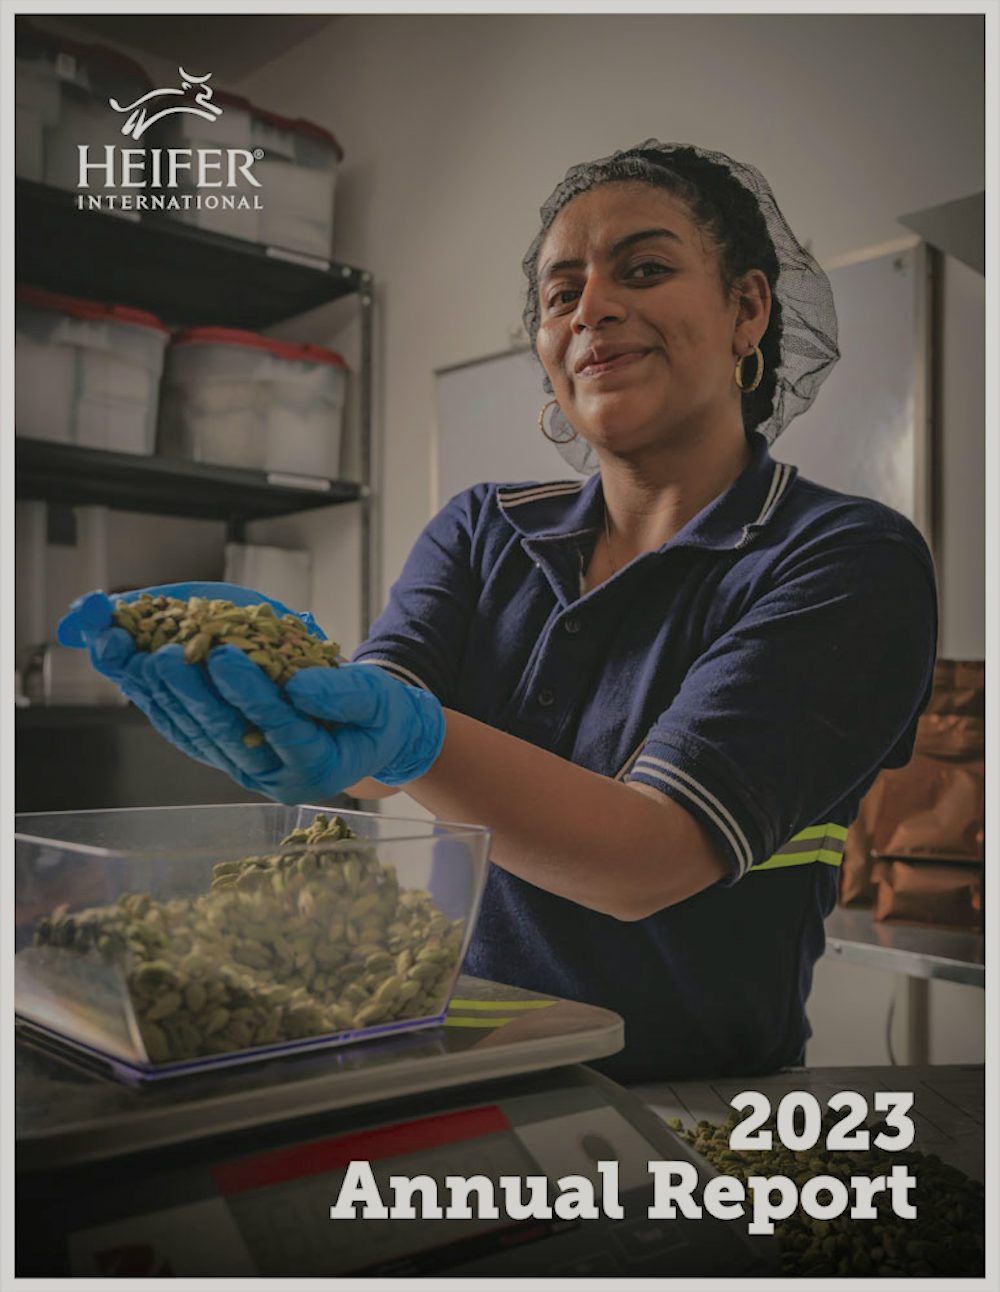 The cover of the Heifer International annual report showing a woman in a hairnet holding handful of cardamom pods.